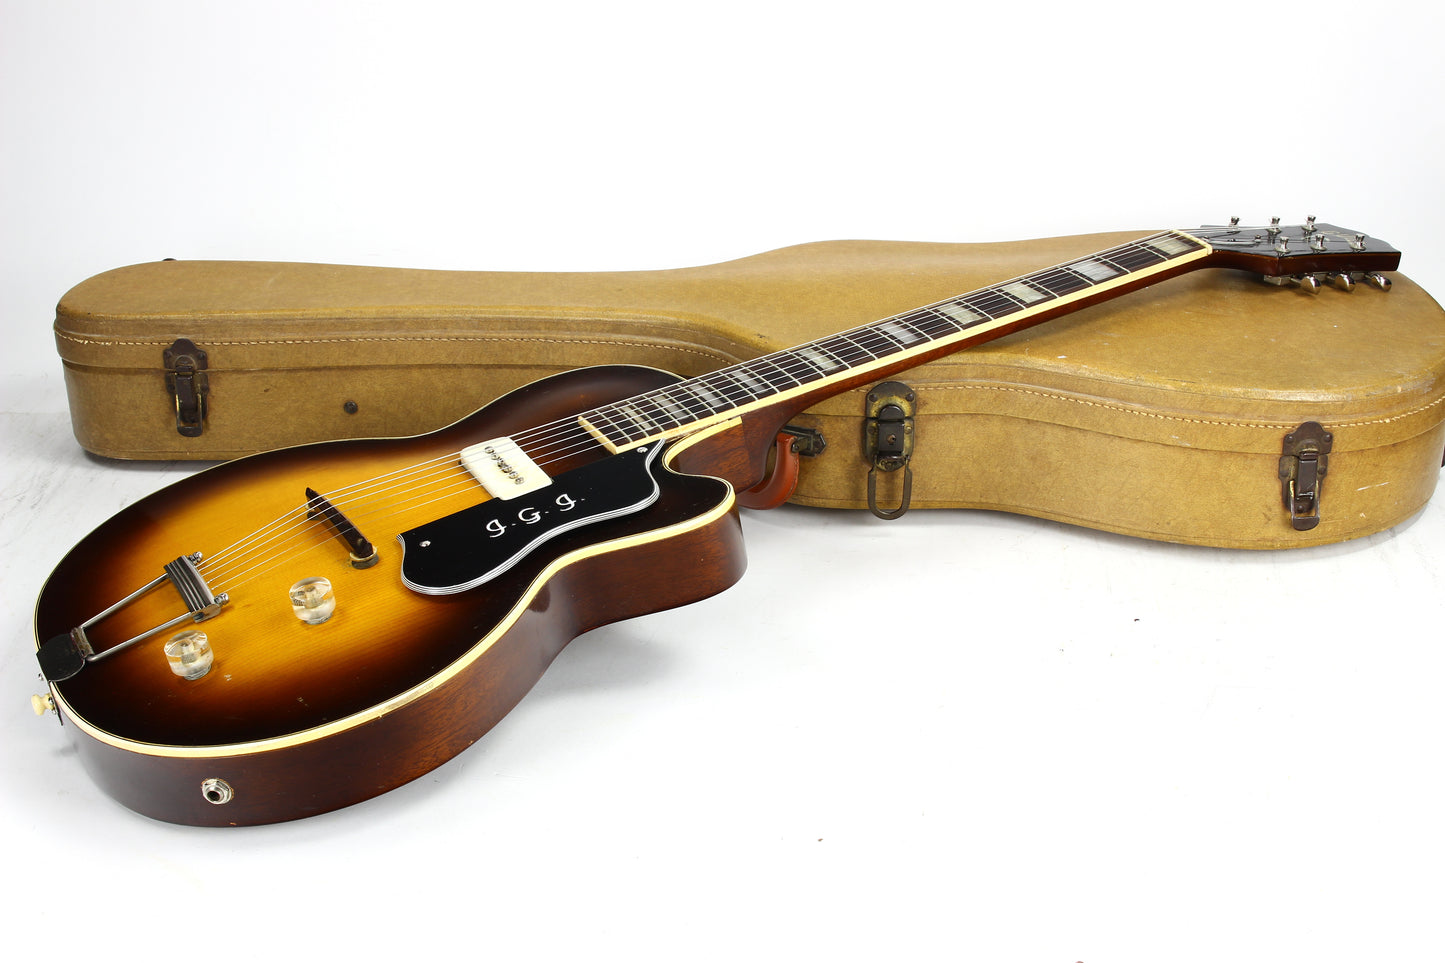 EXTREMELY RARE! 1956 Guild M-75 Aristocrat Custom Order ONE Single Franz Pickup - 1950's Les Paul Competitor!